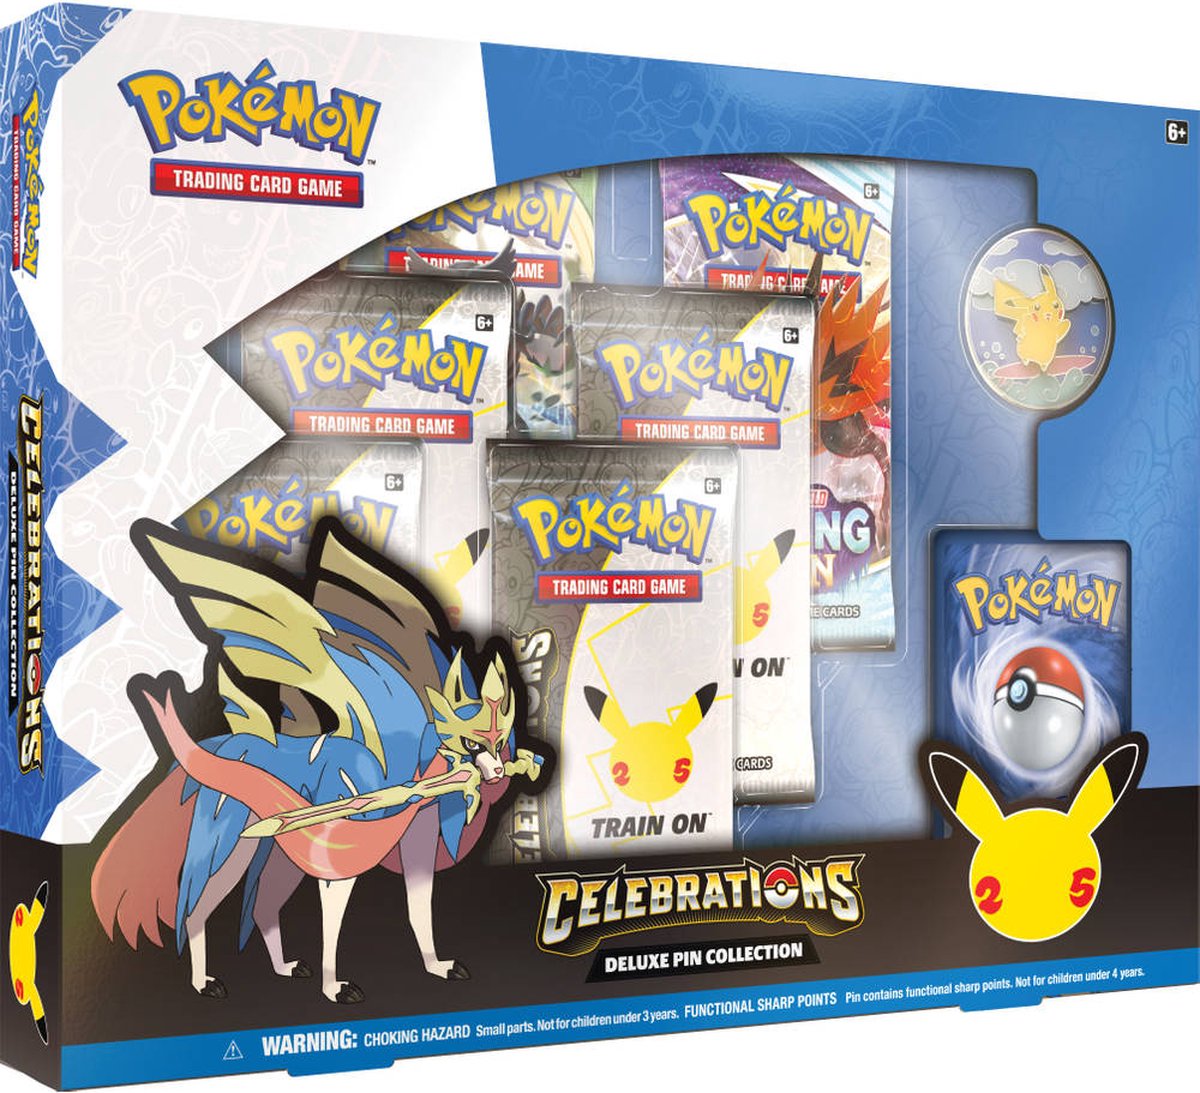 Pokemon Celebrations Deluxe Pin Collection (25th Anniversary)